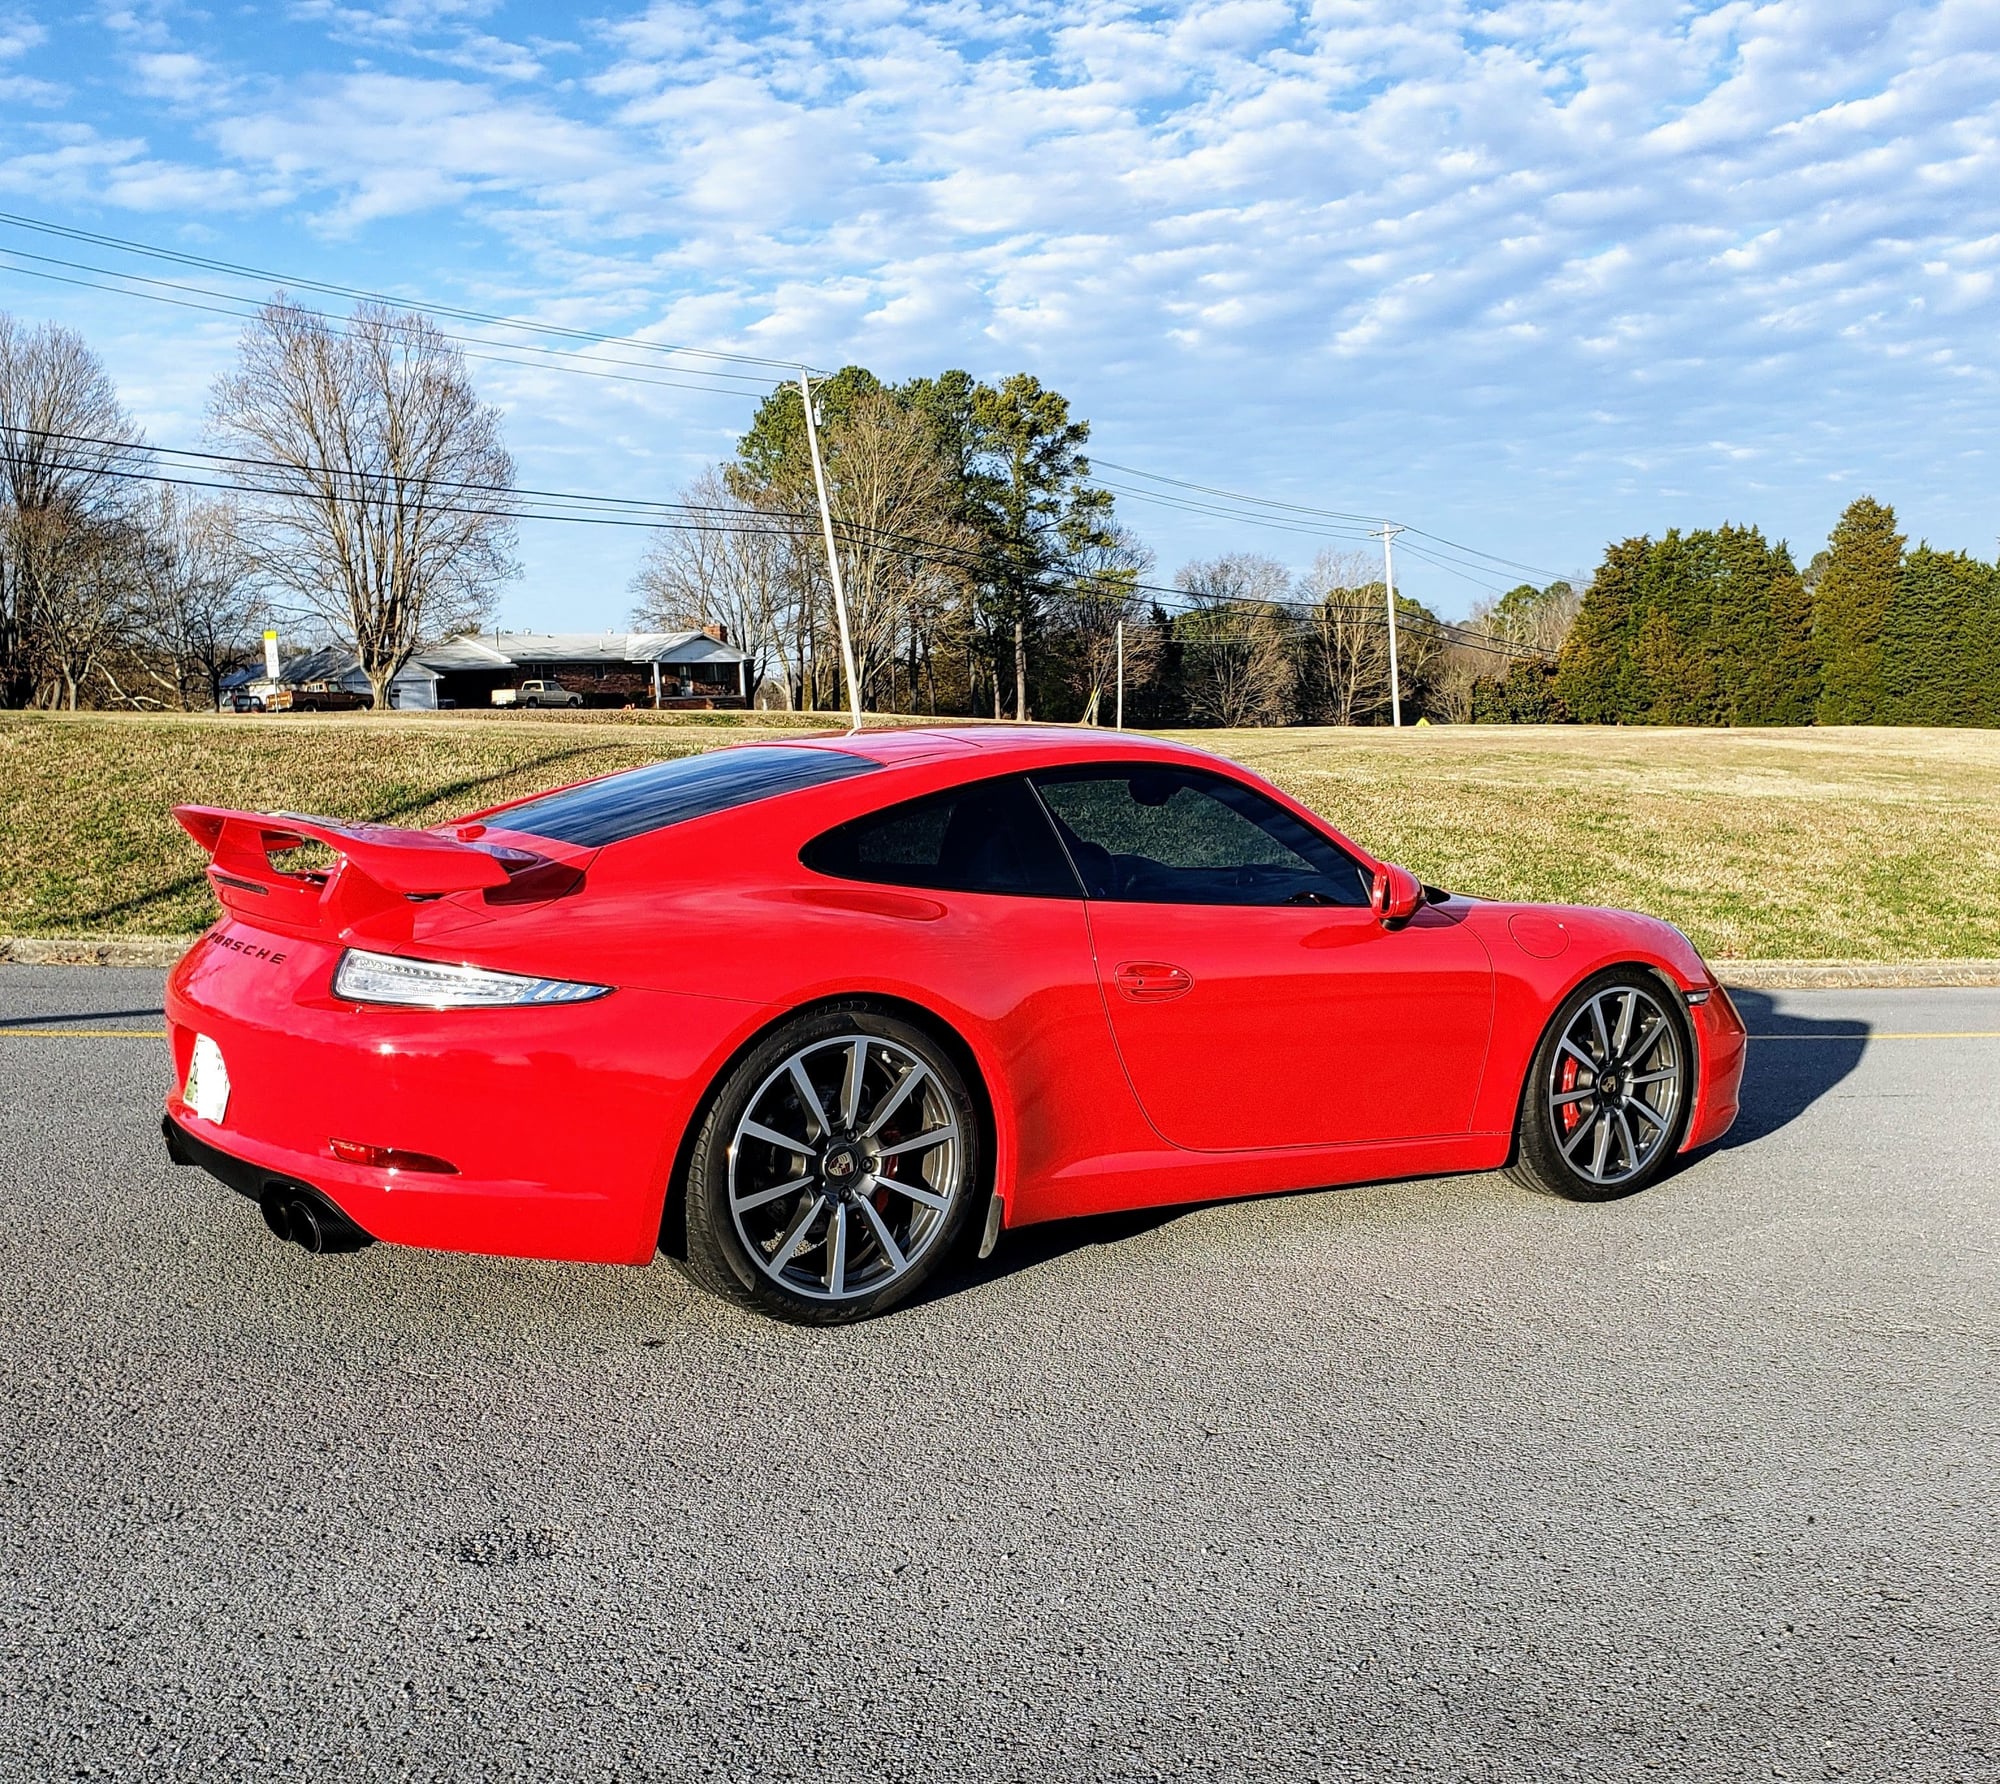 2012 Porsche 911 - 2012 Porsche 991/911 Carrera S Guards Red - Soul Performance Exhaust - Used - VIN WP0AB2A90CS121336 - 30,500 Miles - 6 cyl - 2WD - Automatic - Coupe - Red - Knoxville, TN 37922, United States